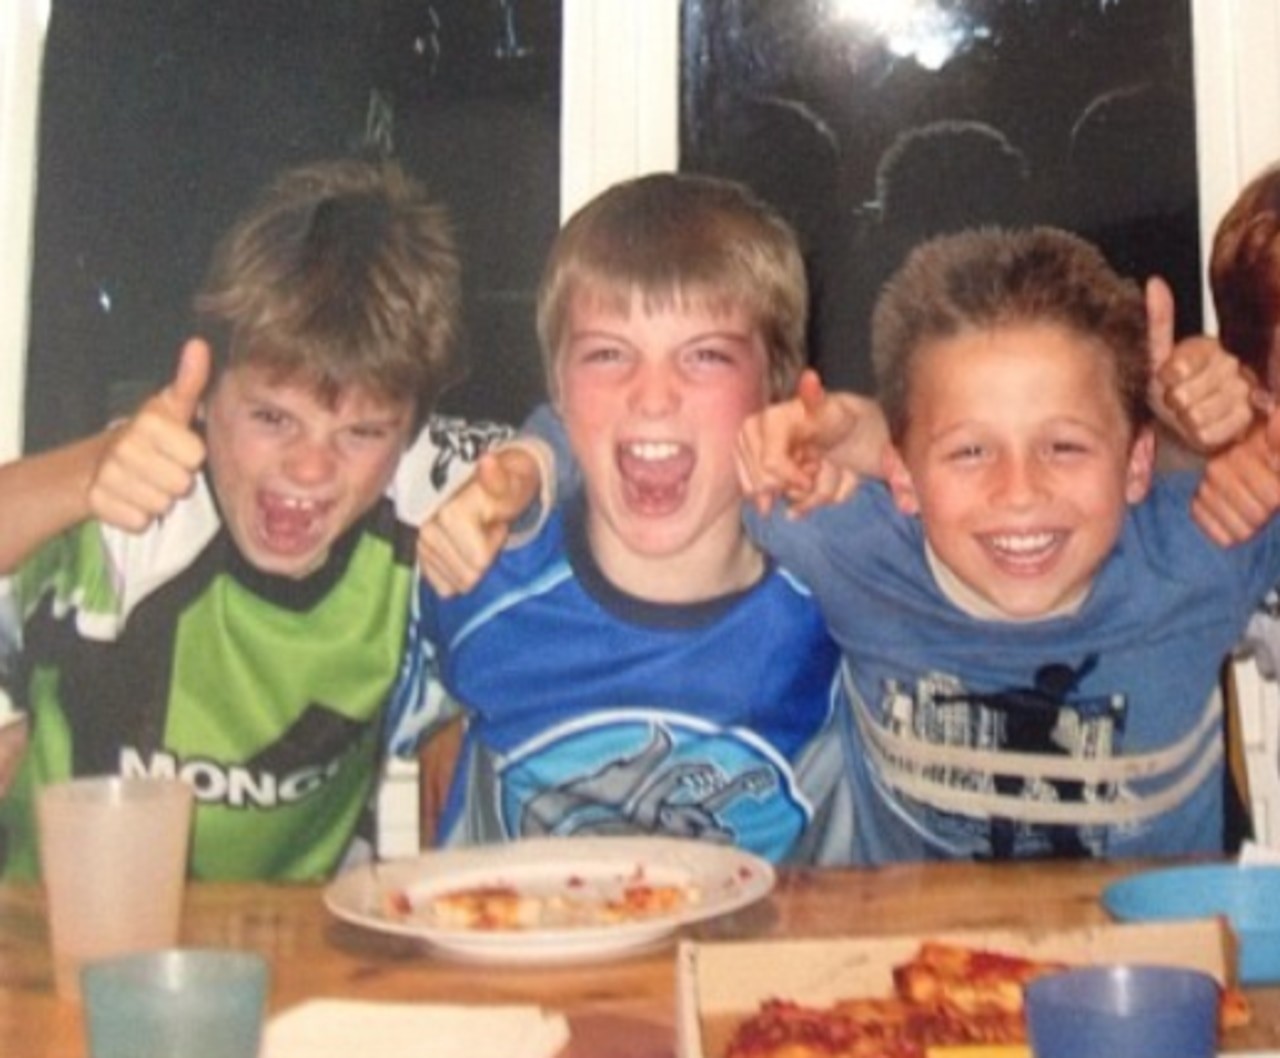 St Kilda player Jack Sinclair, North Melbourne's Luke McDonald and Saint Jack Billings pictured as kids. Picture: Instagram